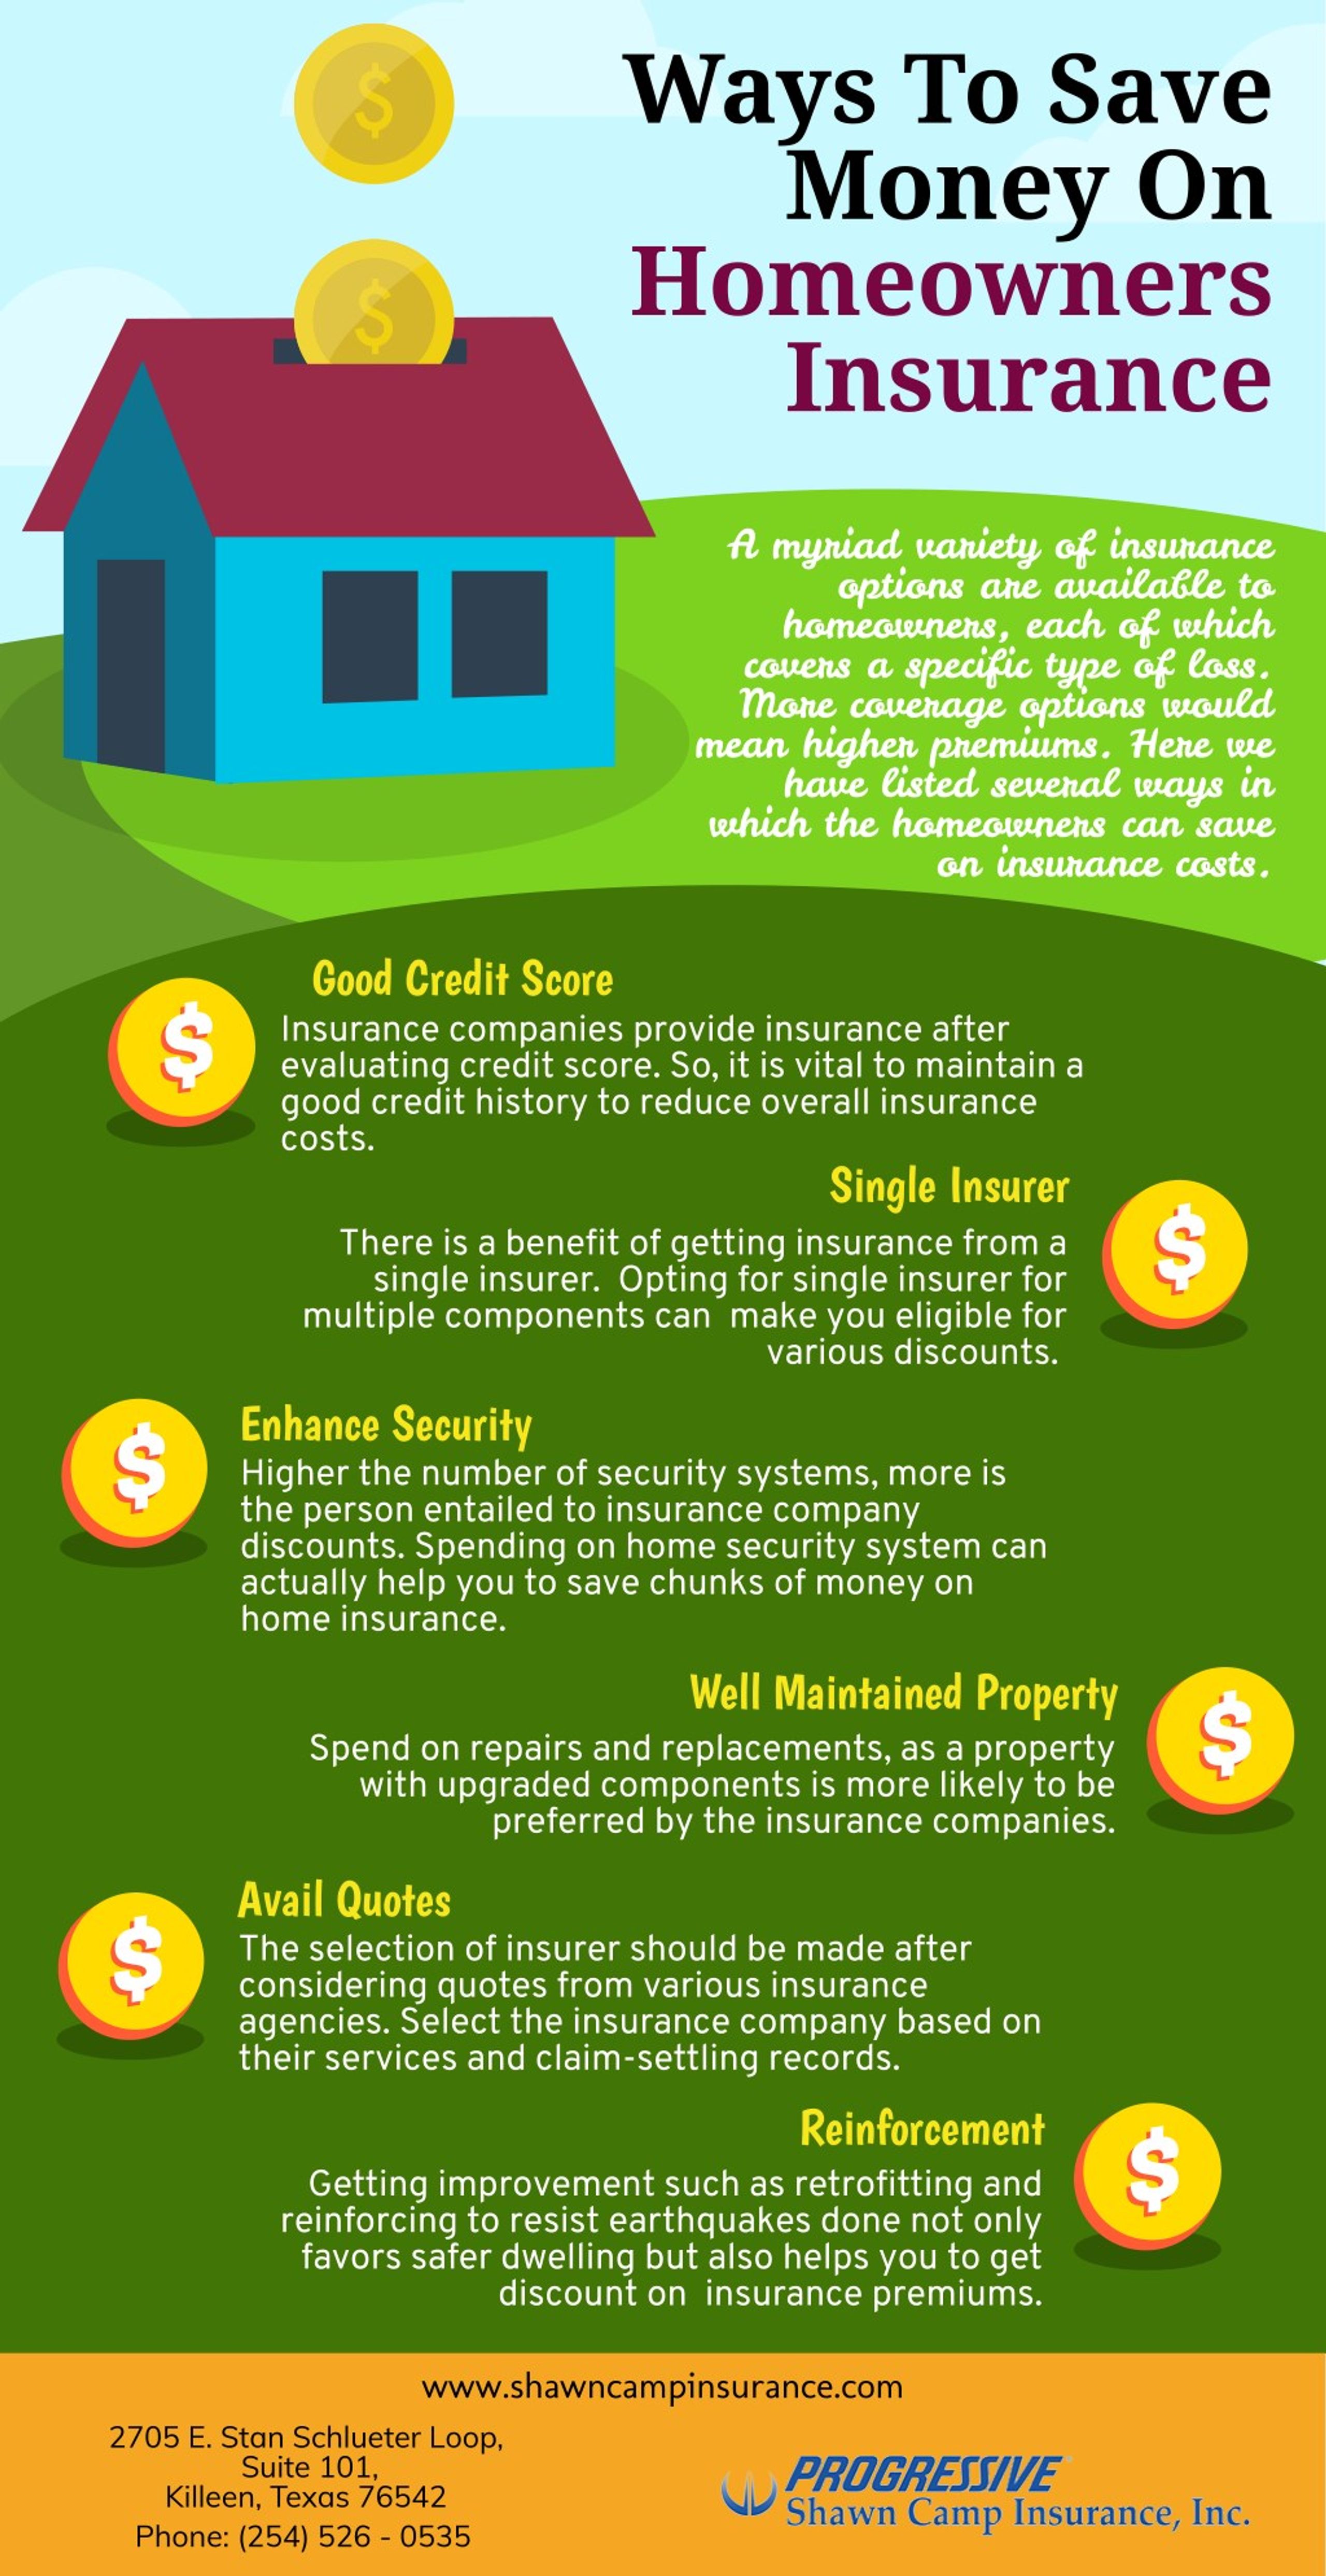 PPT Ways To Save Money On Homeowners Insurance PowerPoint